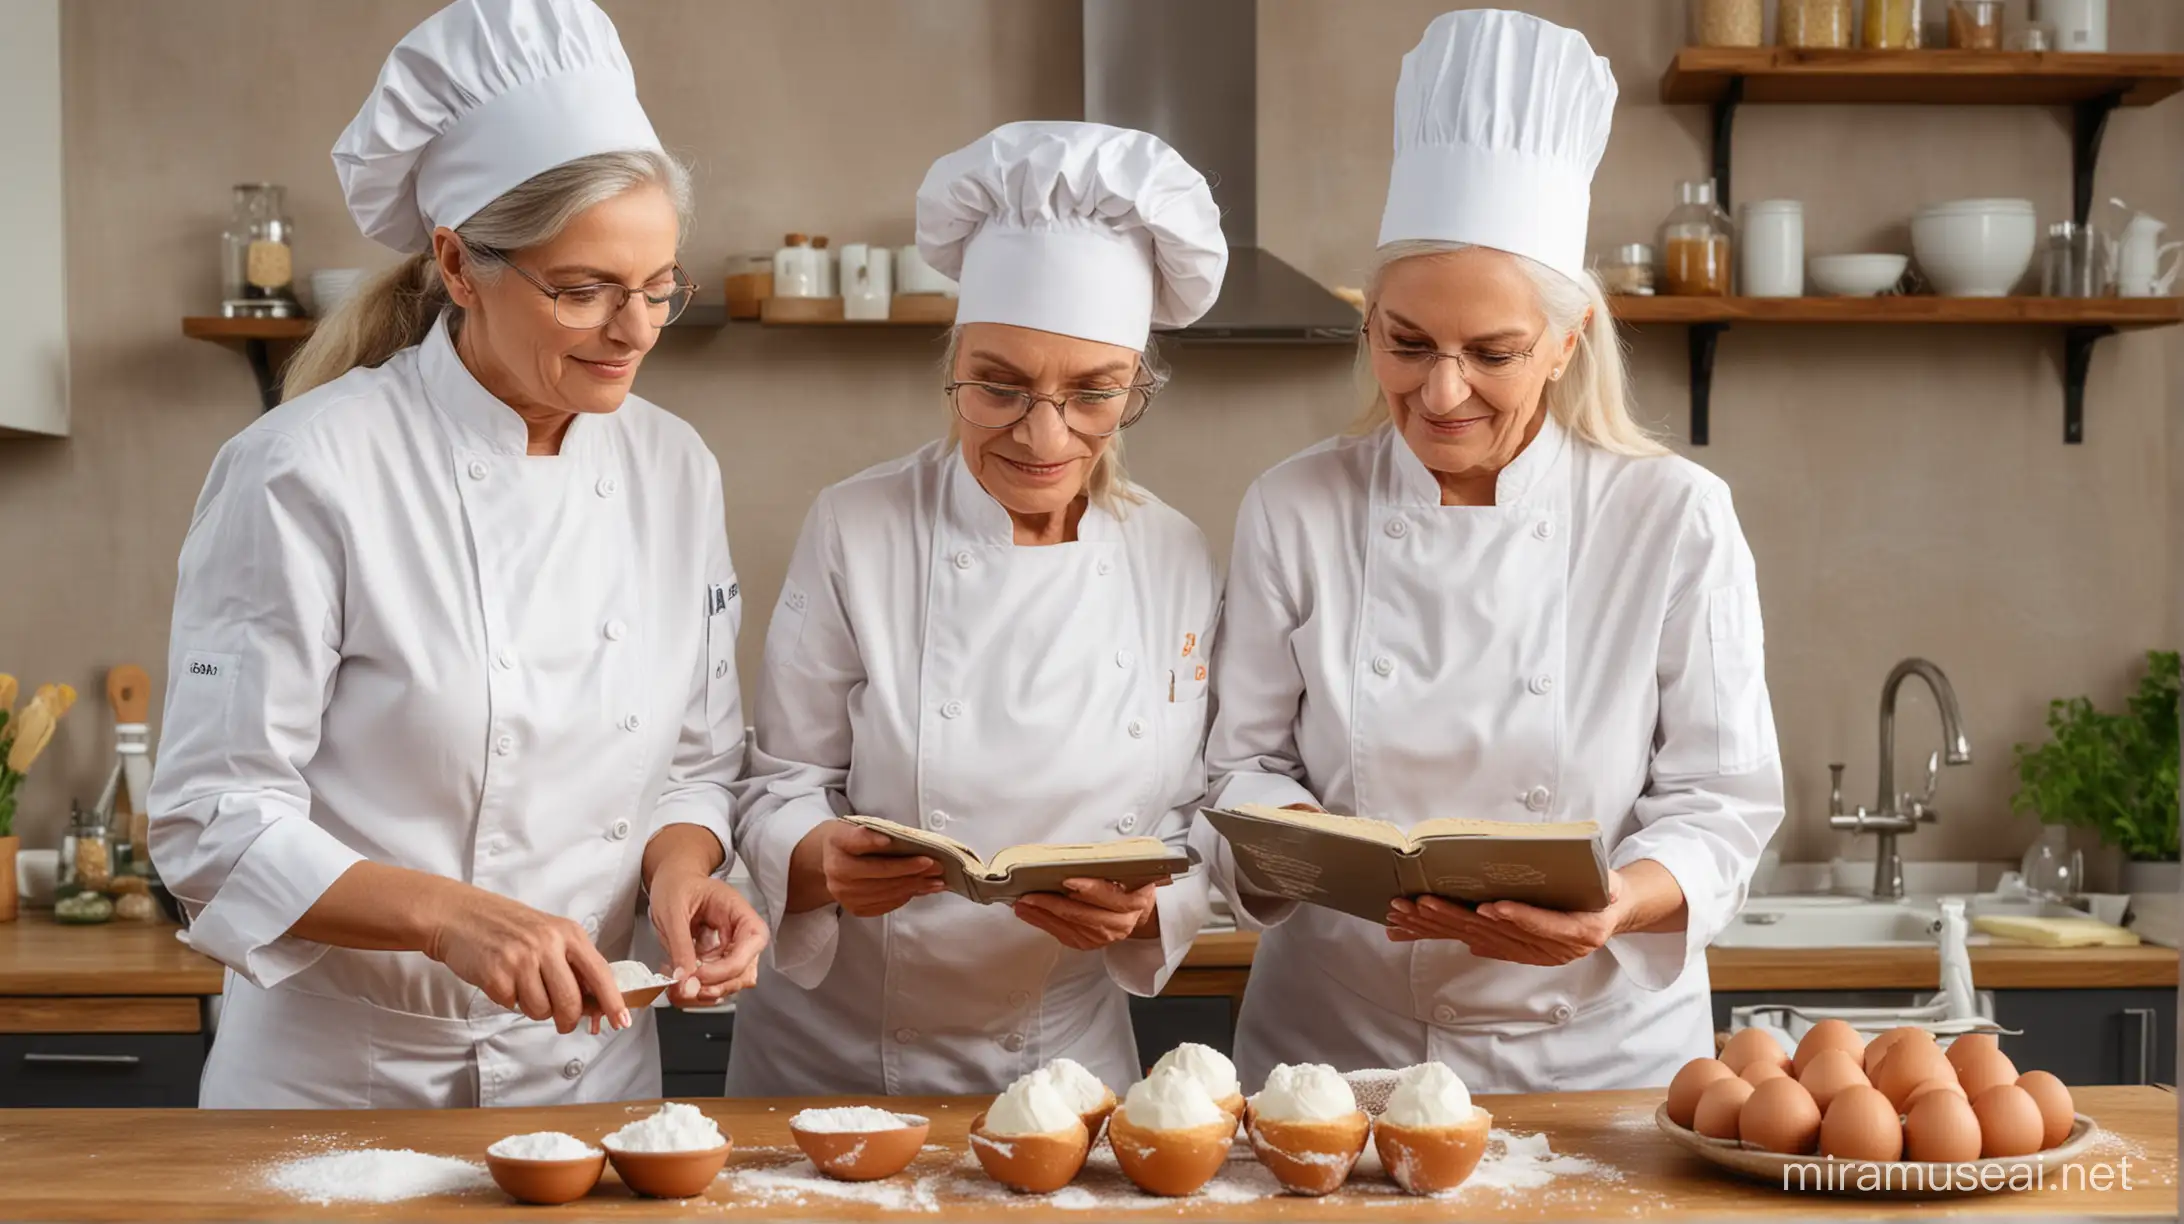 3 female chefs and old couple of different nationalities standing at looking at cookbook that shows how to replace eggs with powdered plant based vegan ingredient in a cooking school kitchen. Do not show eggs, show cakes, cheesecakes, cookies.